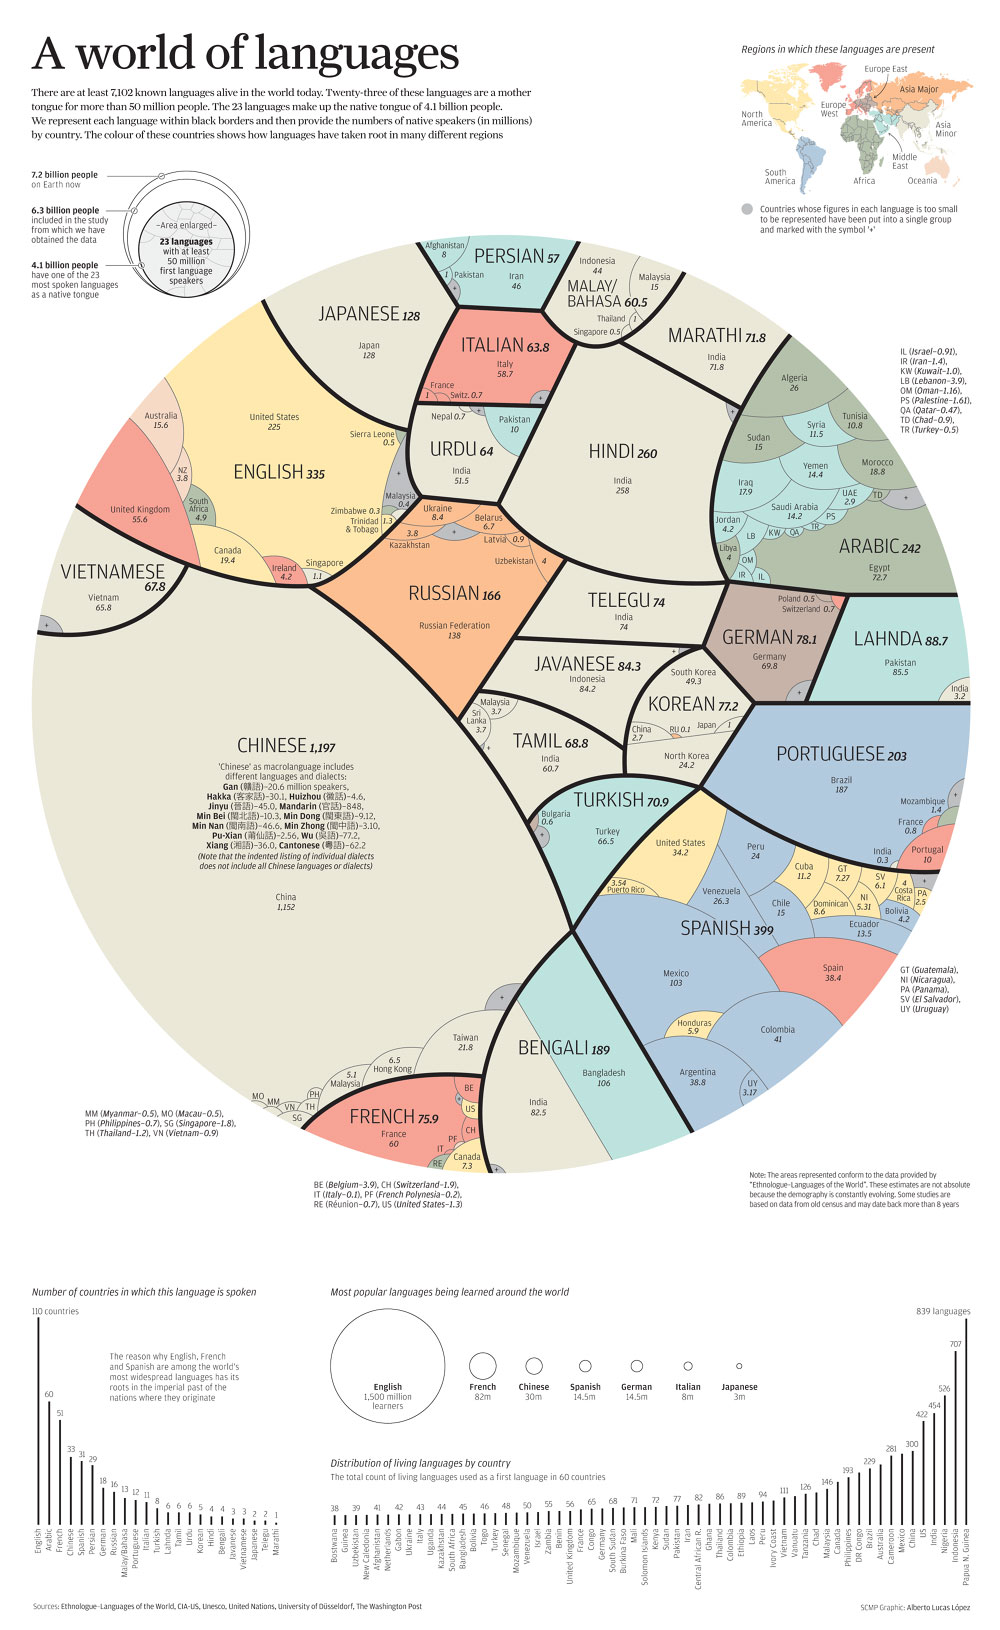 languages-of-the-world-2.jpg